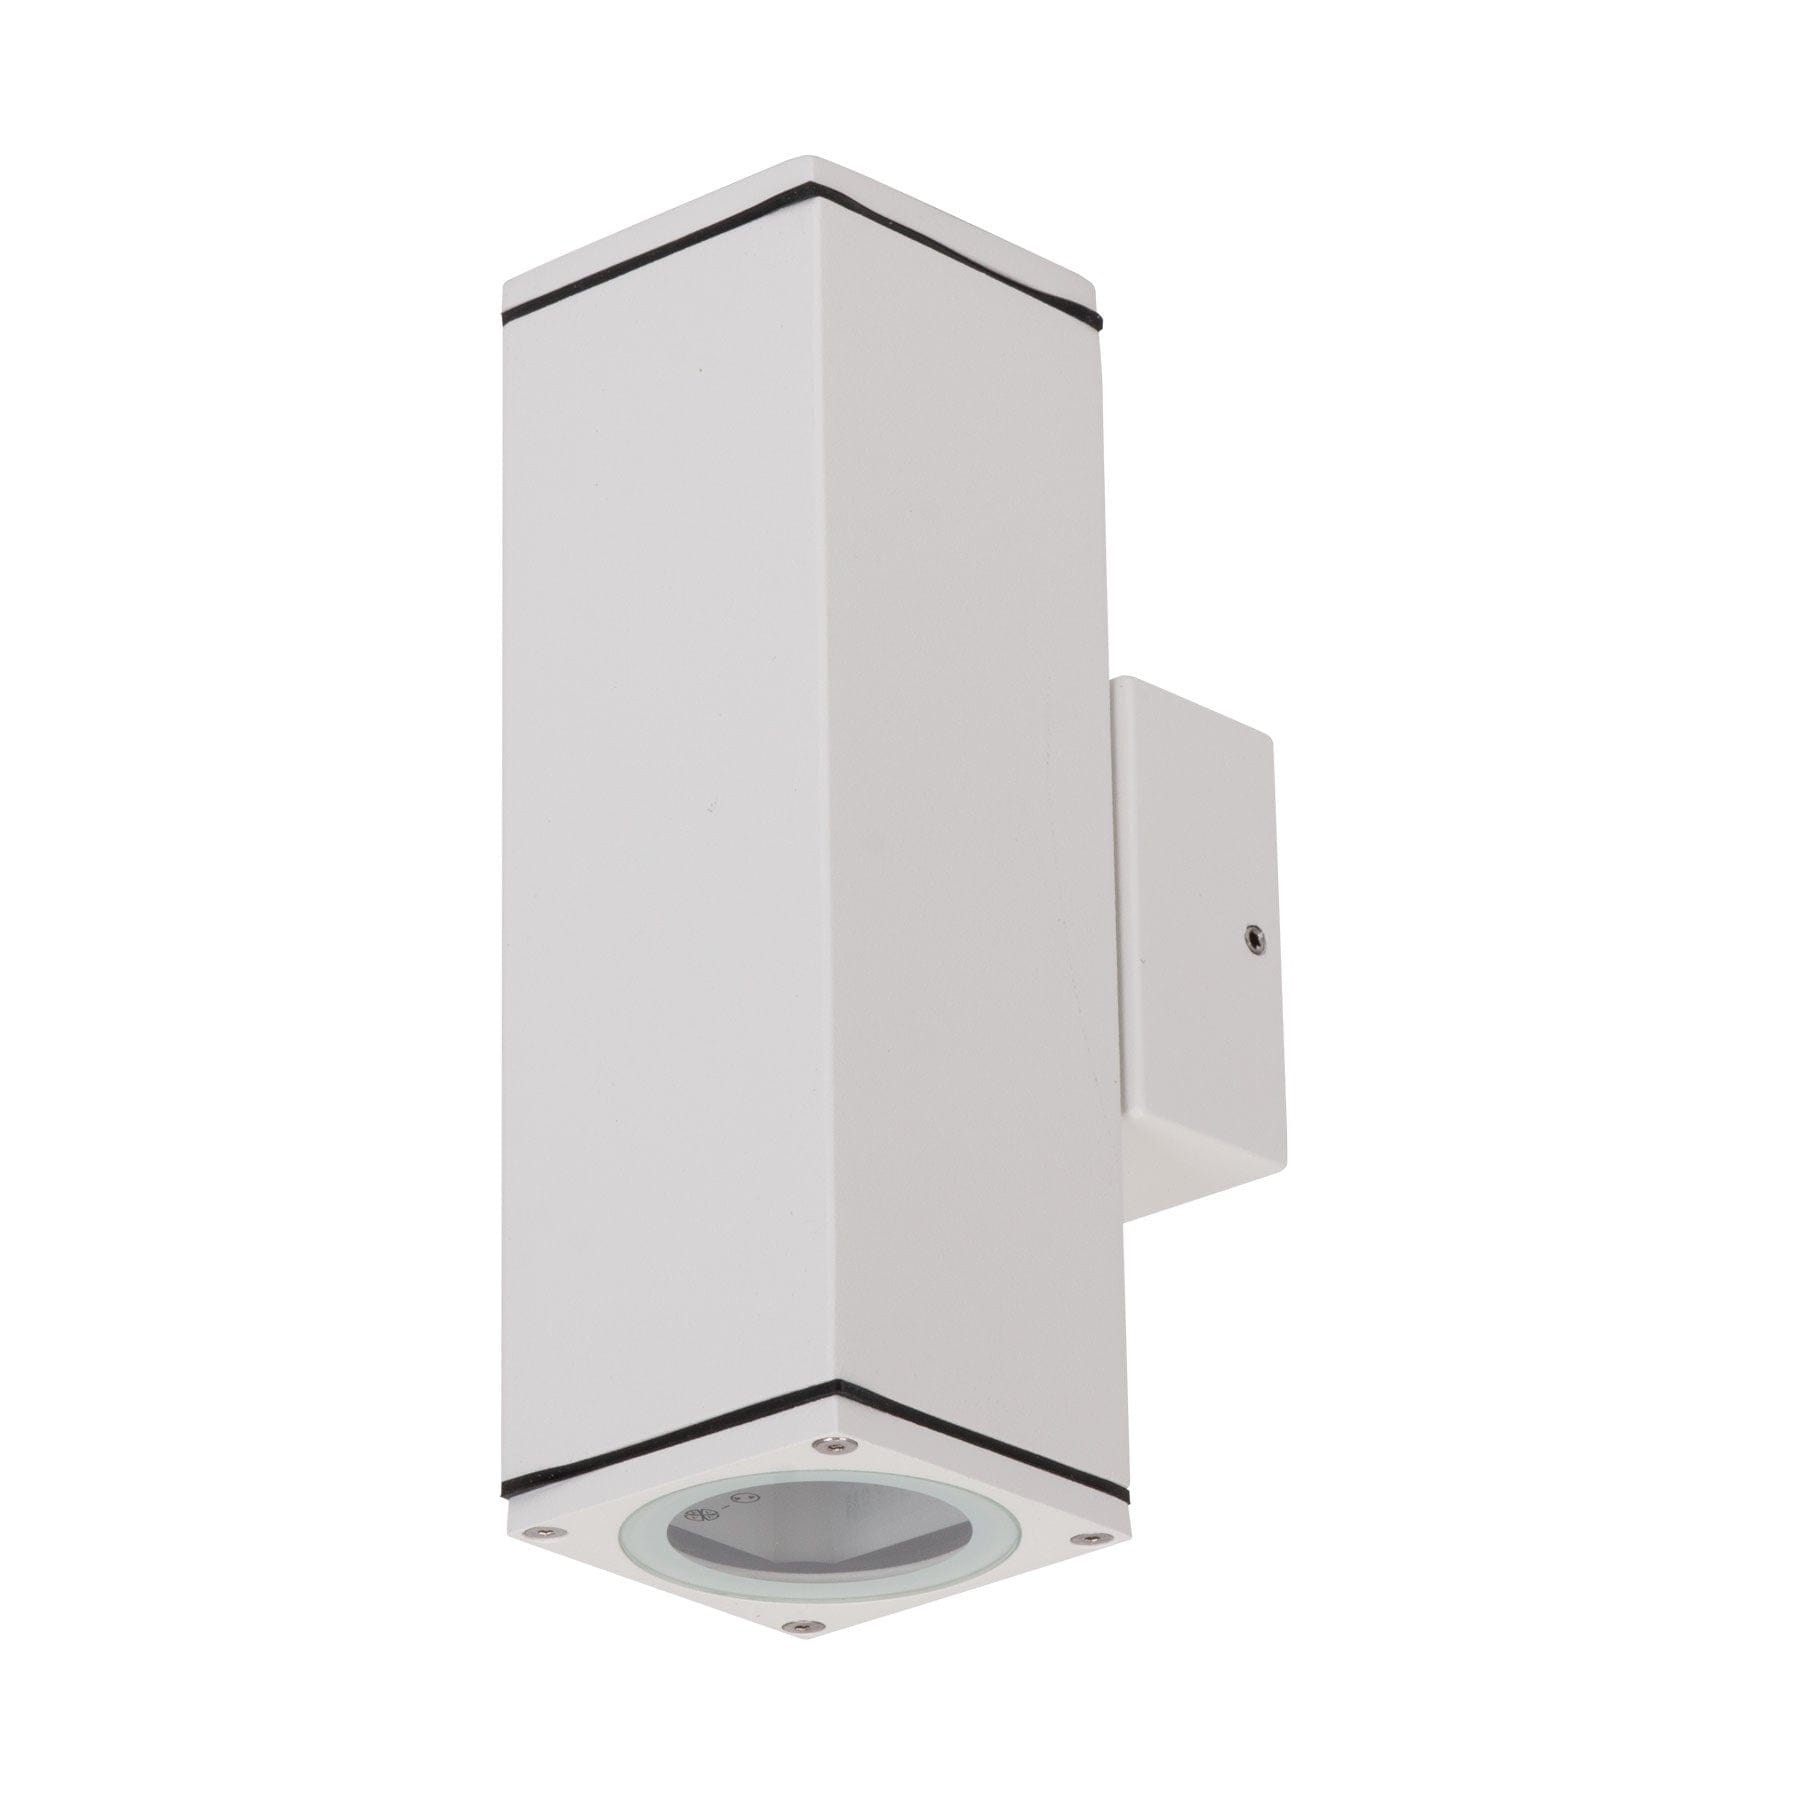 Domus Lighting Outdoor Wall Lights White / No Lamp DOMUS ALPHA-2 EXTERIOR WALL LIGHT WITH OR WITHOUT LAMP Lights-For-You 19797